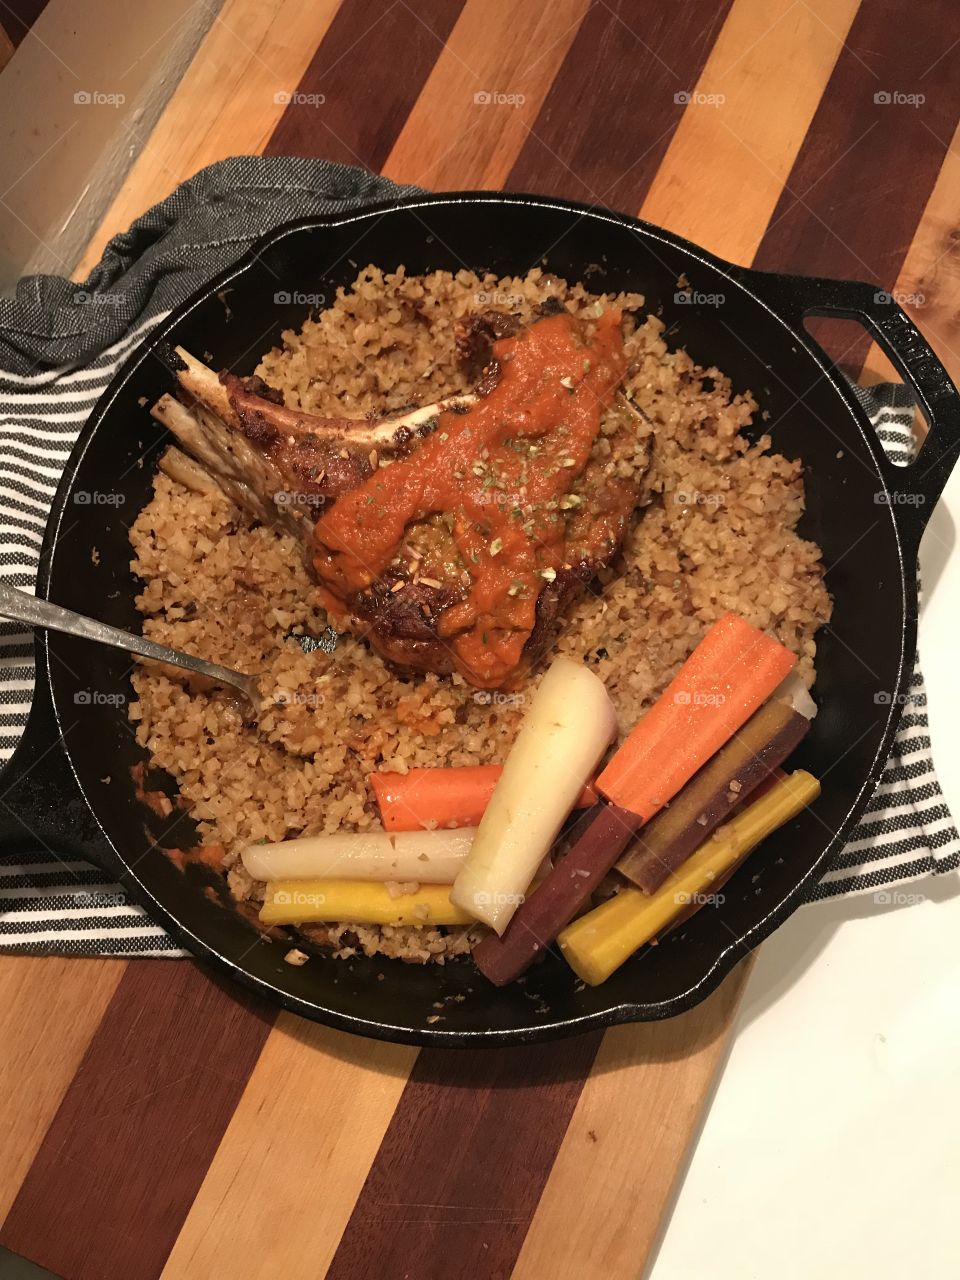 Extra thick pork chop on a bed of riced cauliflower with friends colored carrots and butternut squash and carrot purée in an iron skillet 